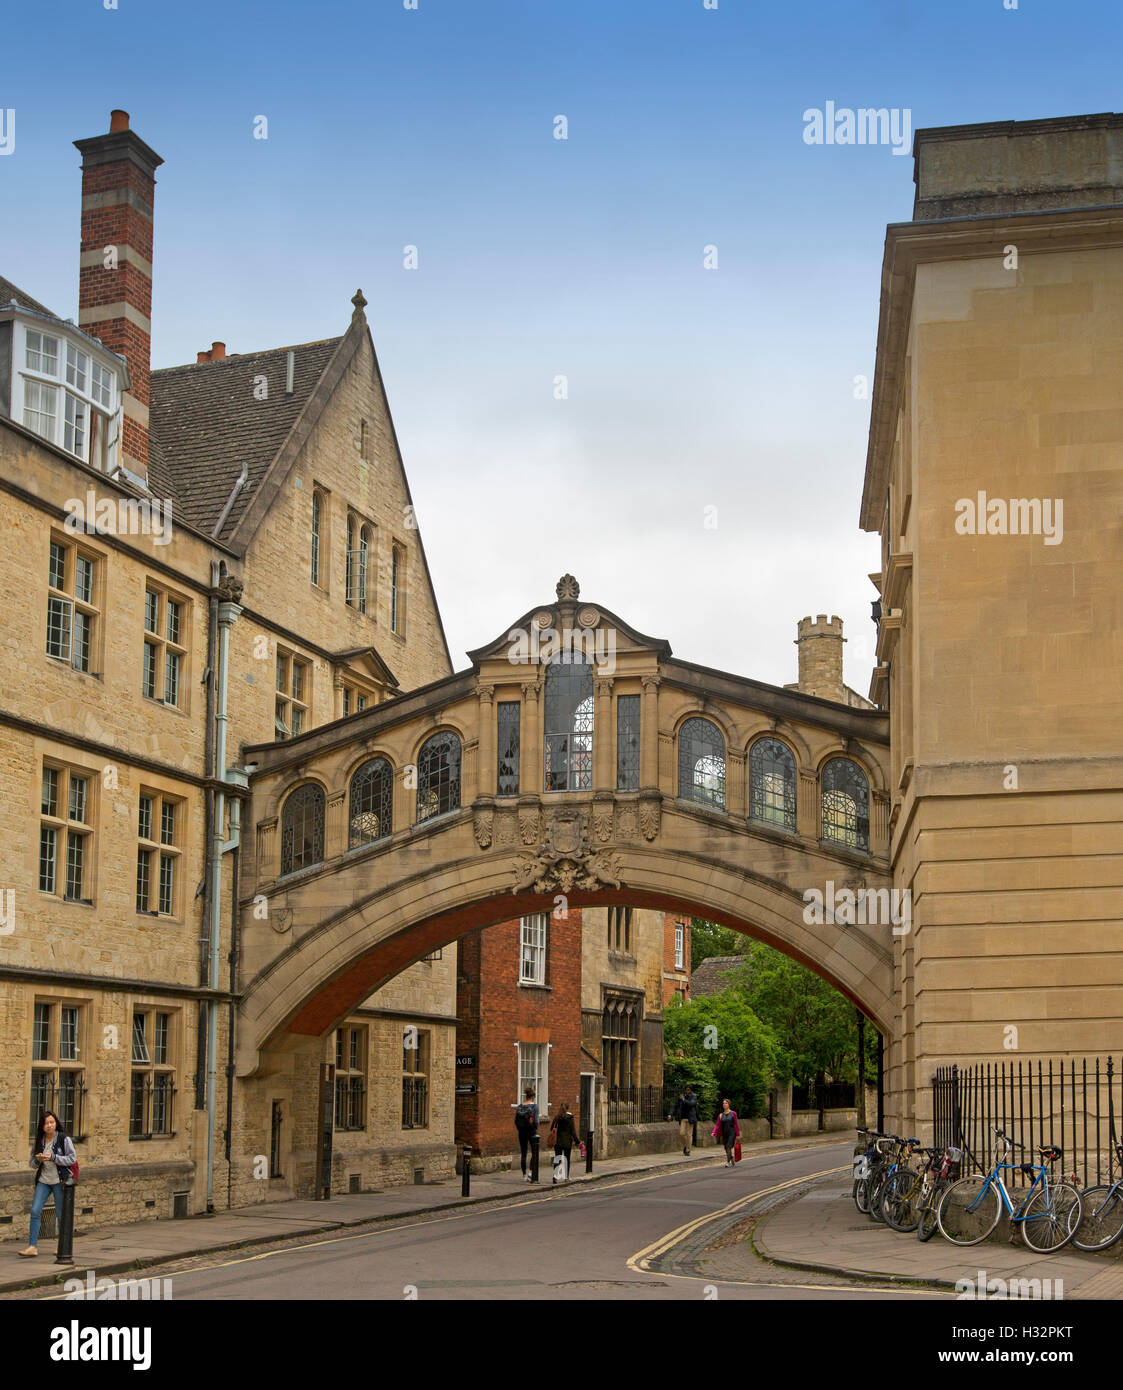 Ornate Bridge of Sighs in Oxford, with bicycles leaning against wall of adjacent  building, pedestrians passing by & blue sky, England Stock Photo